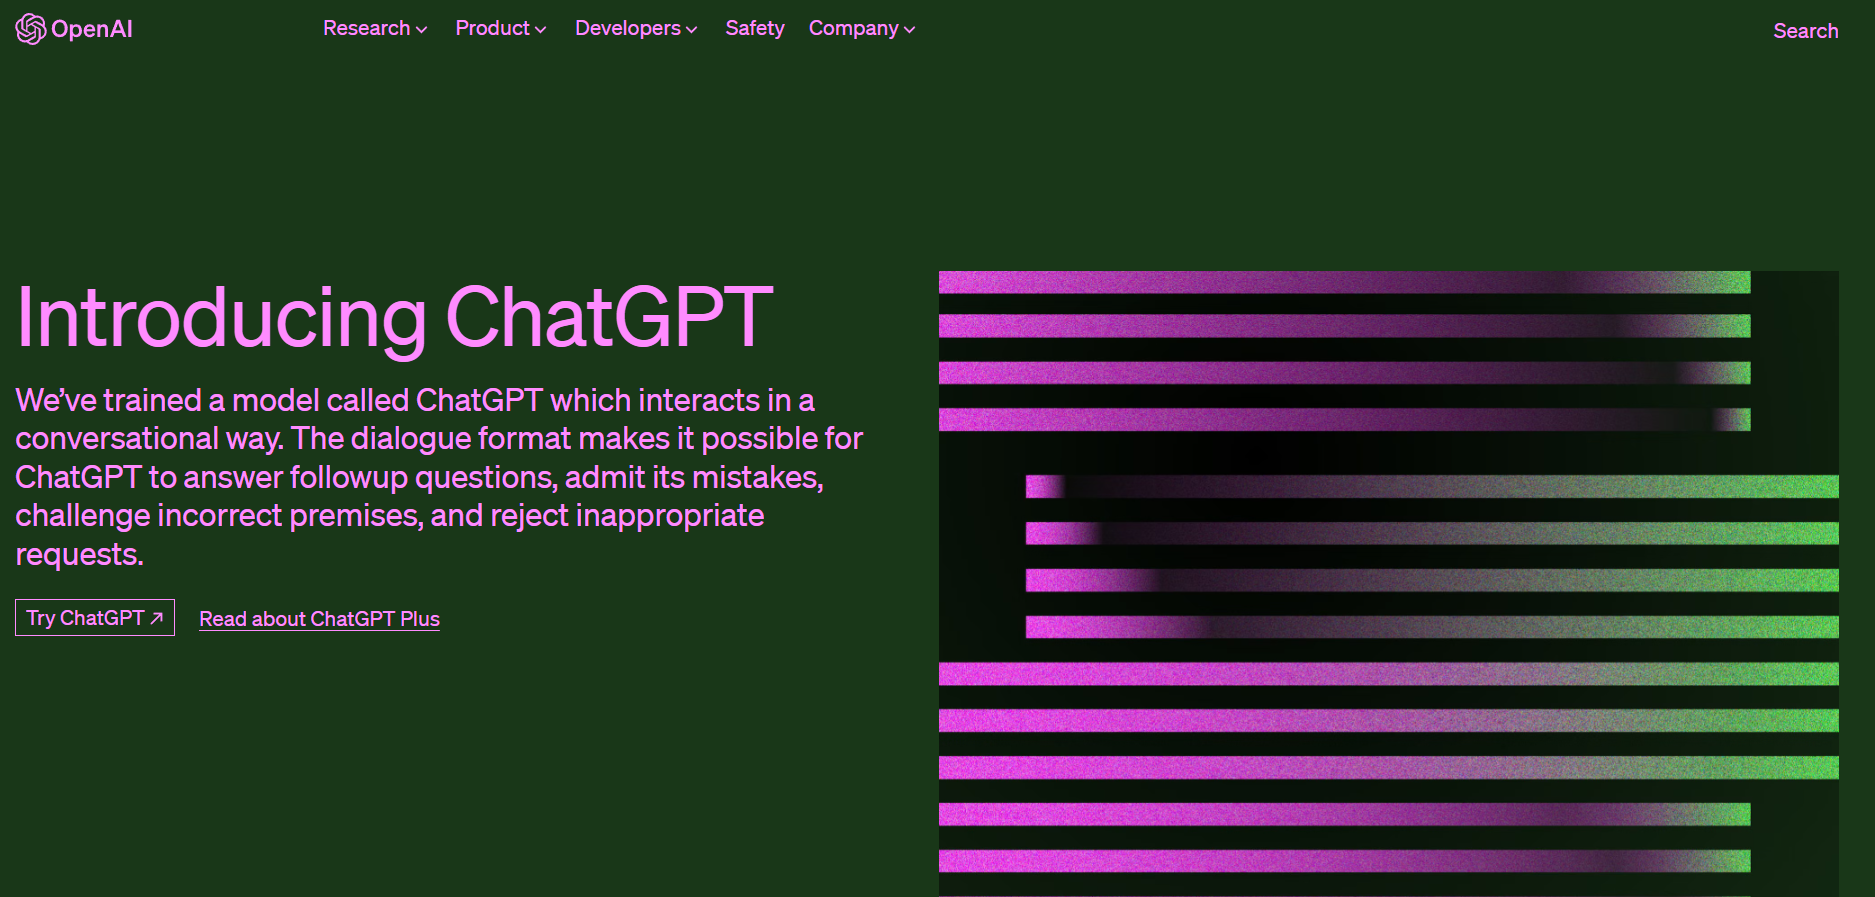 One of the most Popular Productivity Tools, ChatGPT